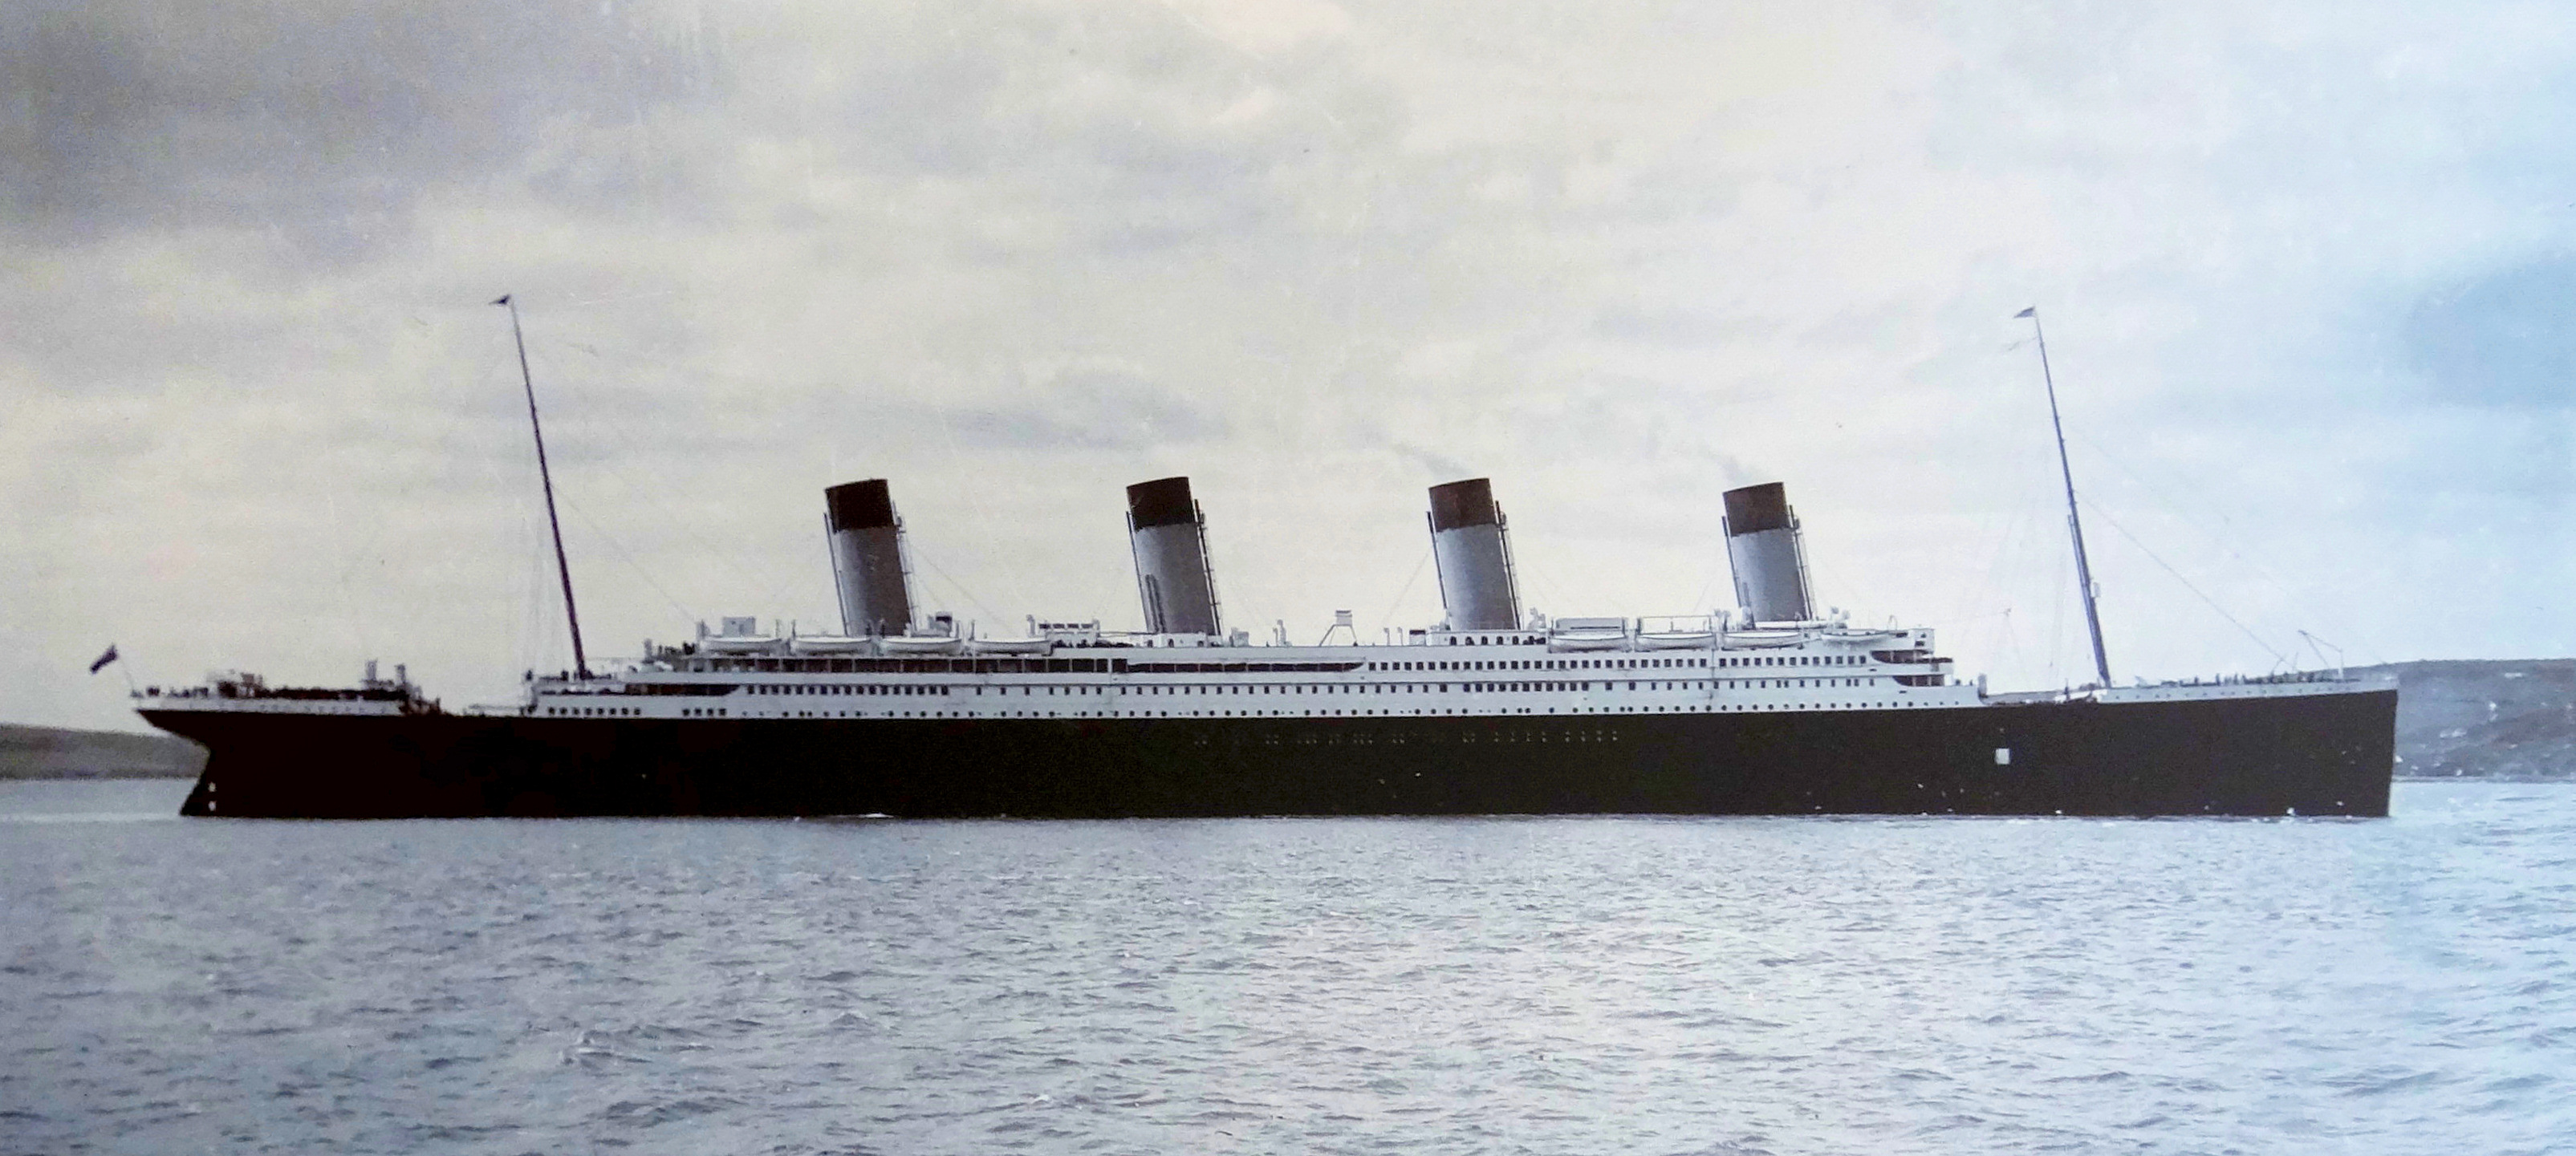 12 Things You Should Know About RMS Titanic – 5 Minutes with Joe